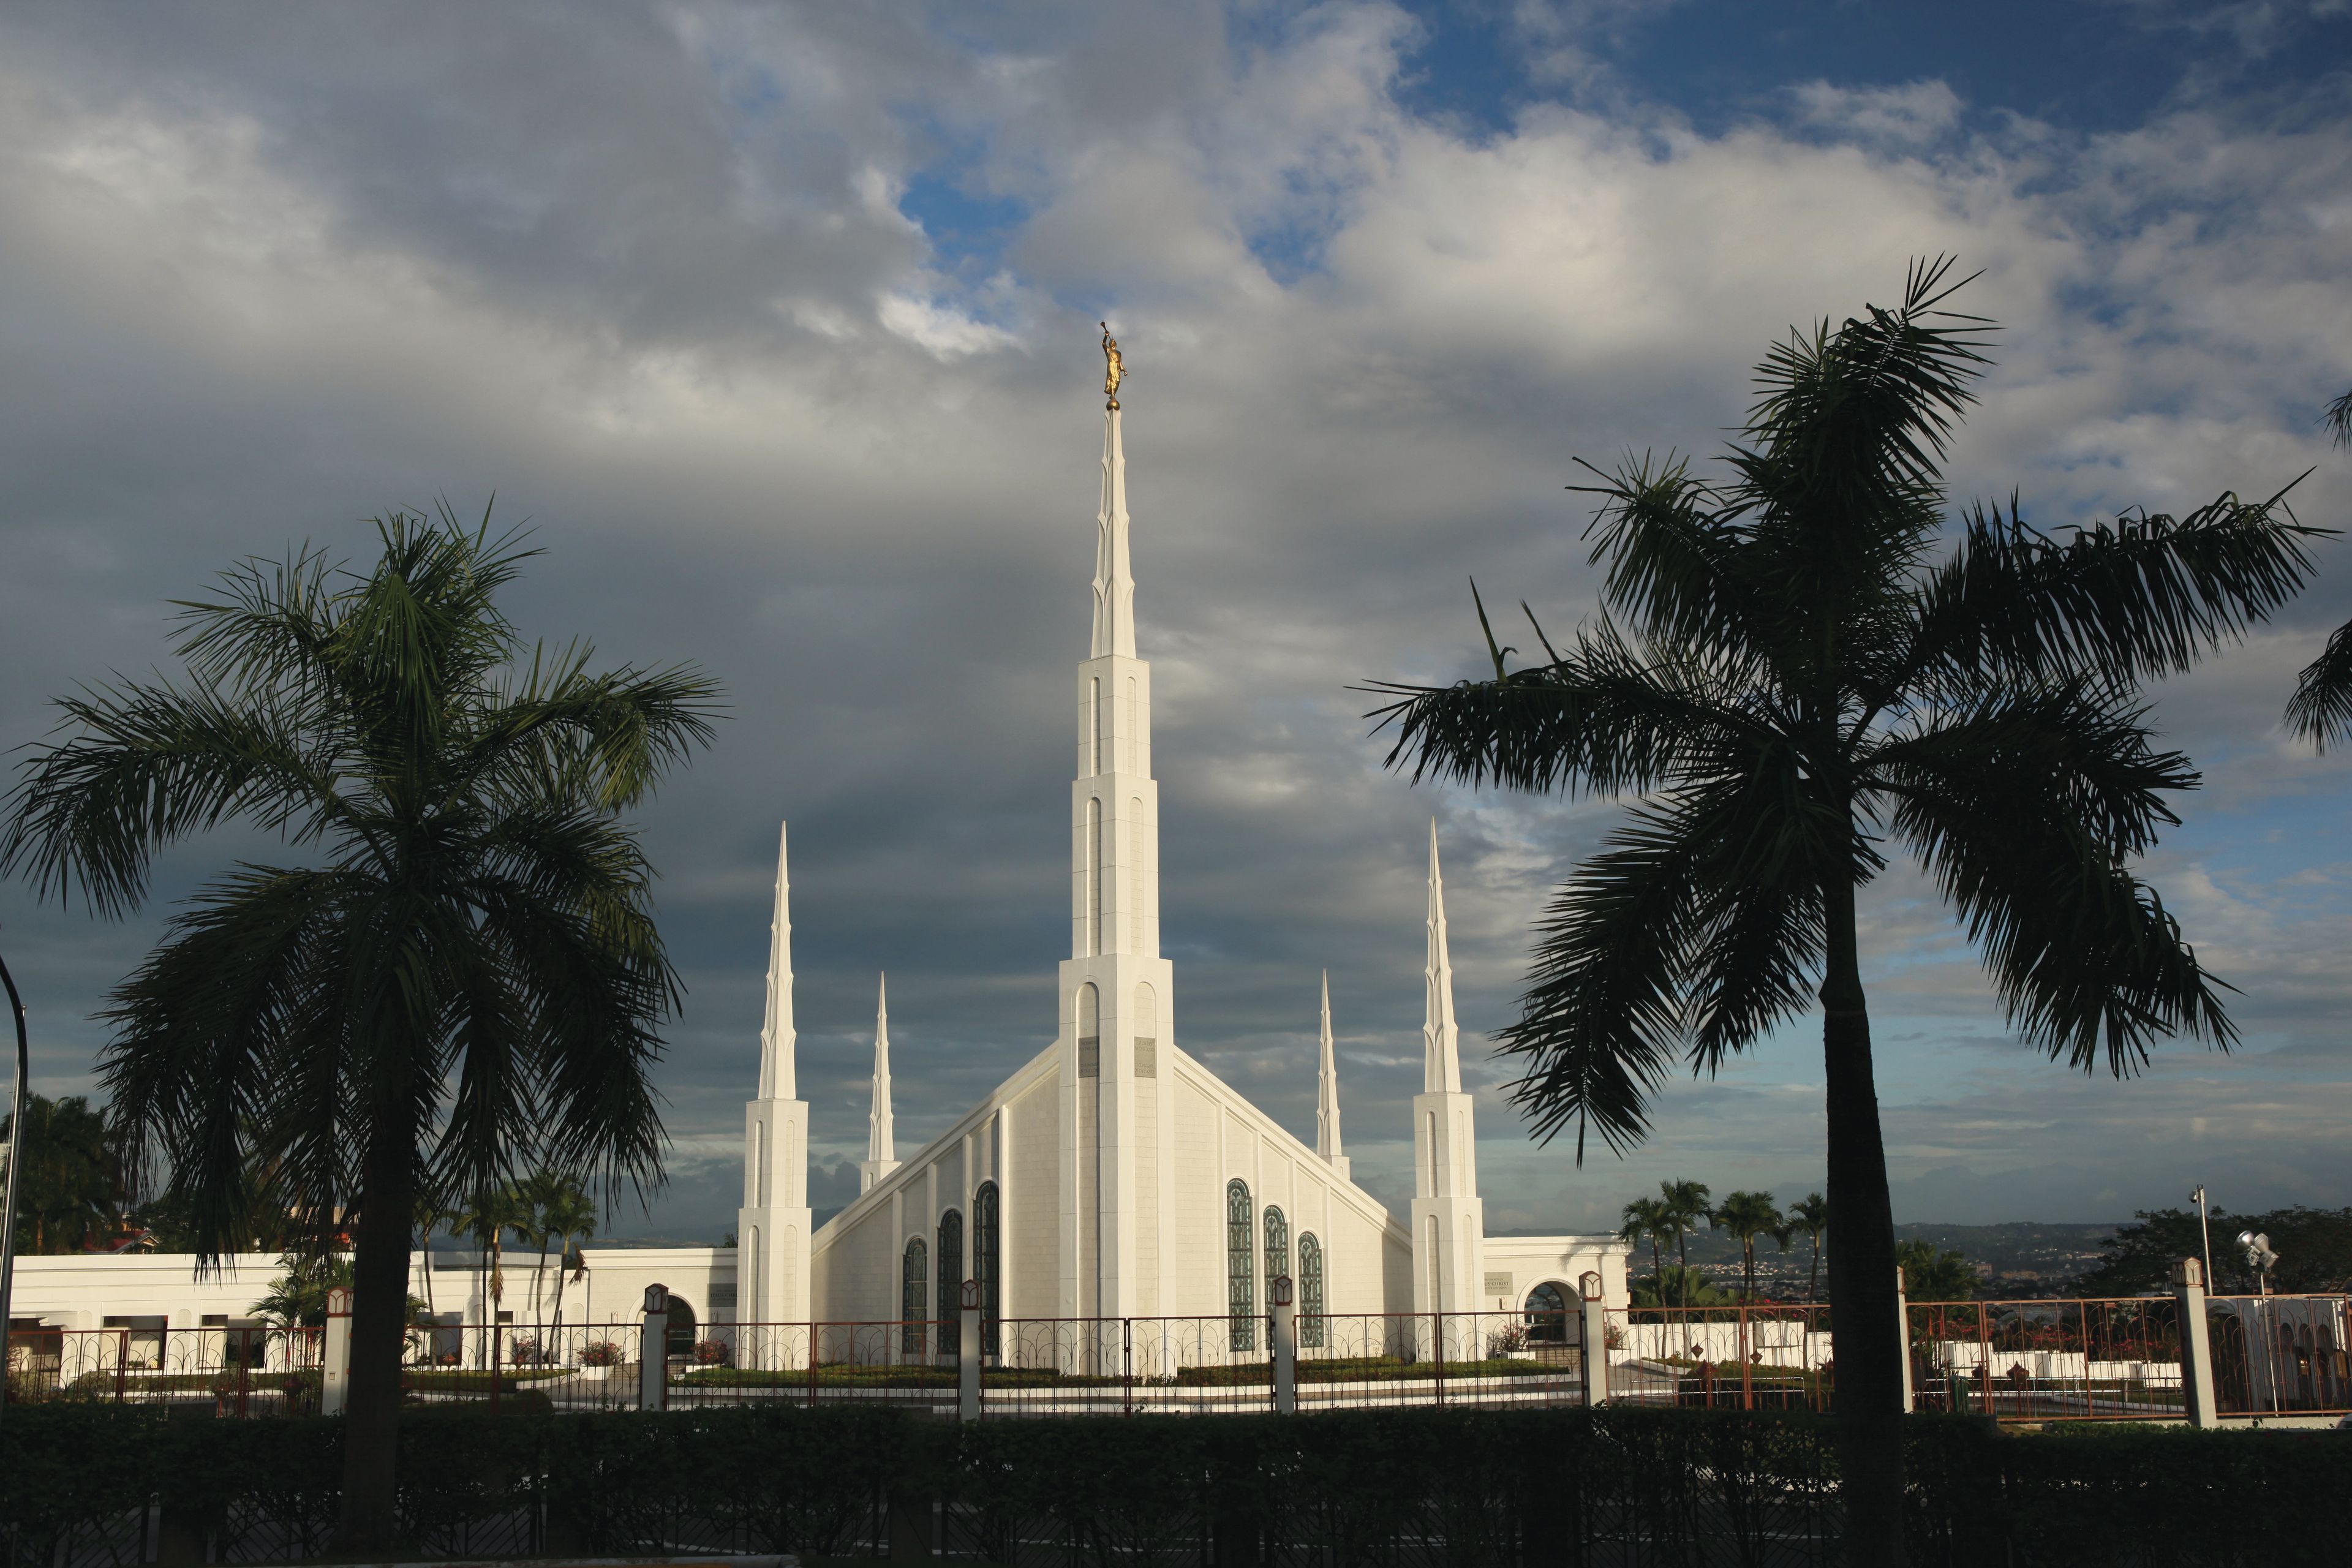 The Manila Philippines Temple during a storm, including the spires and scenery.